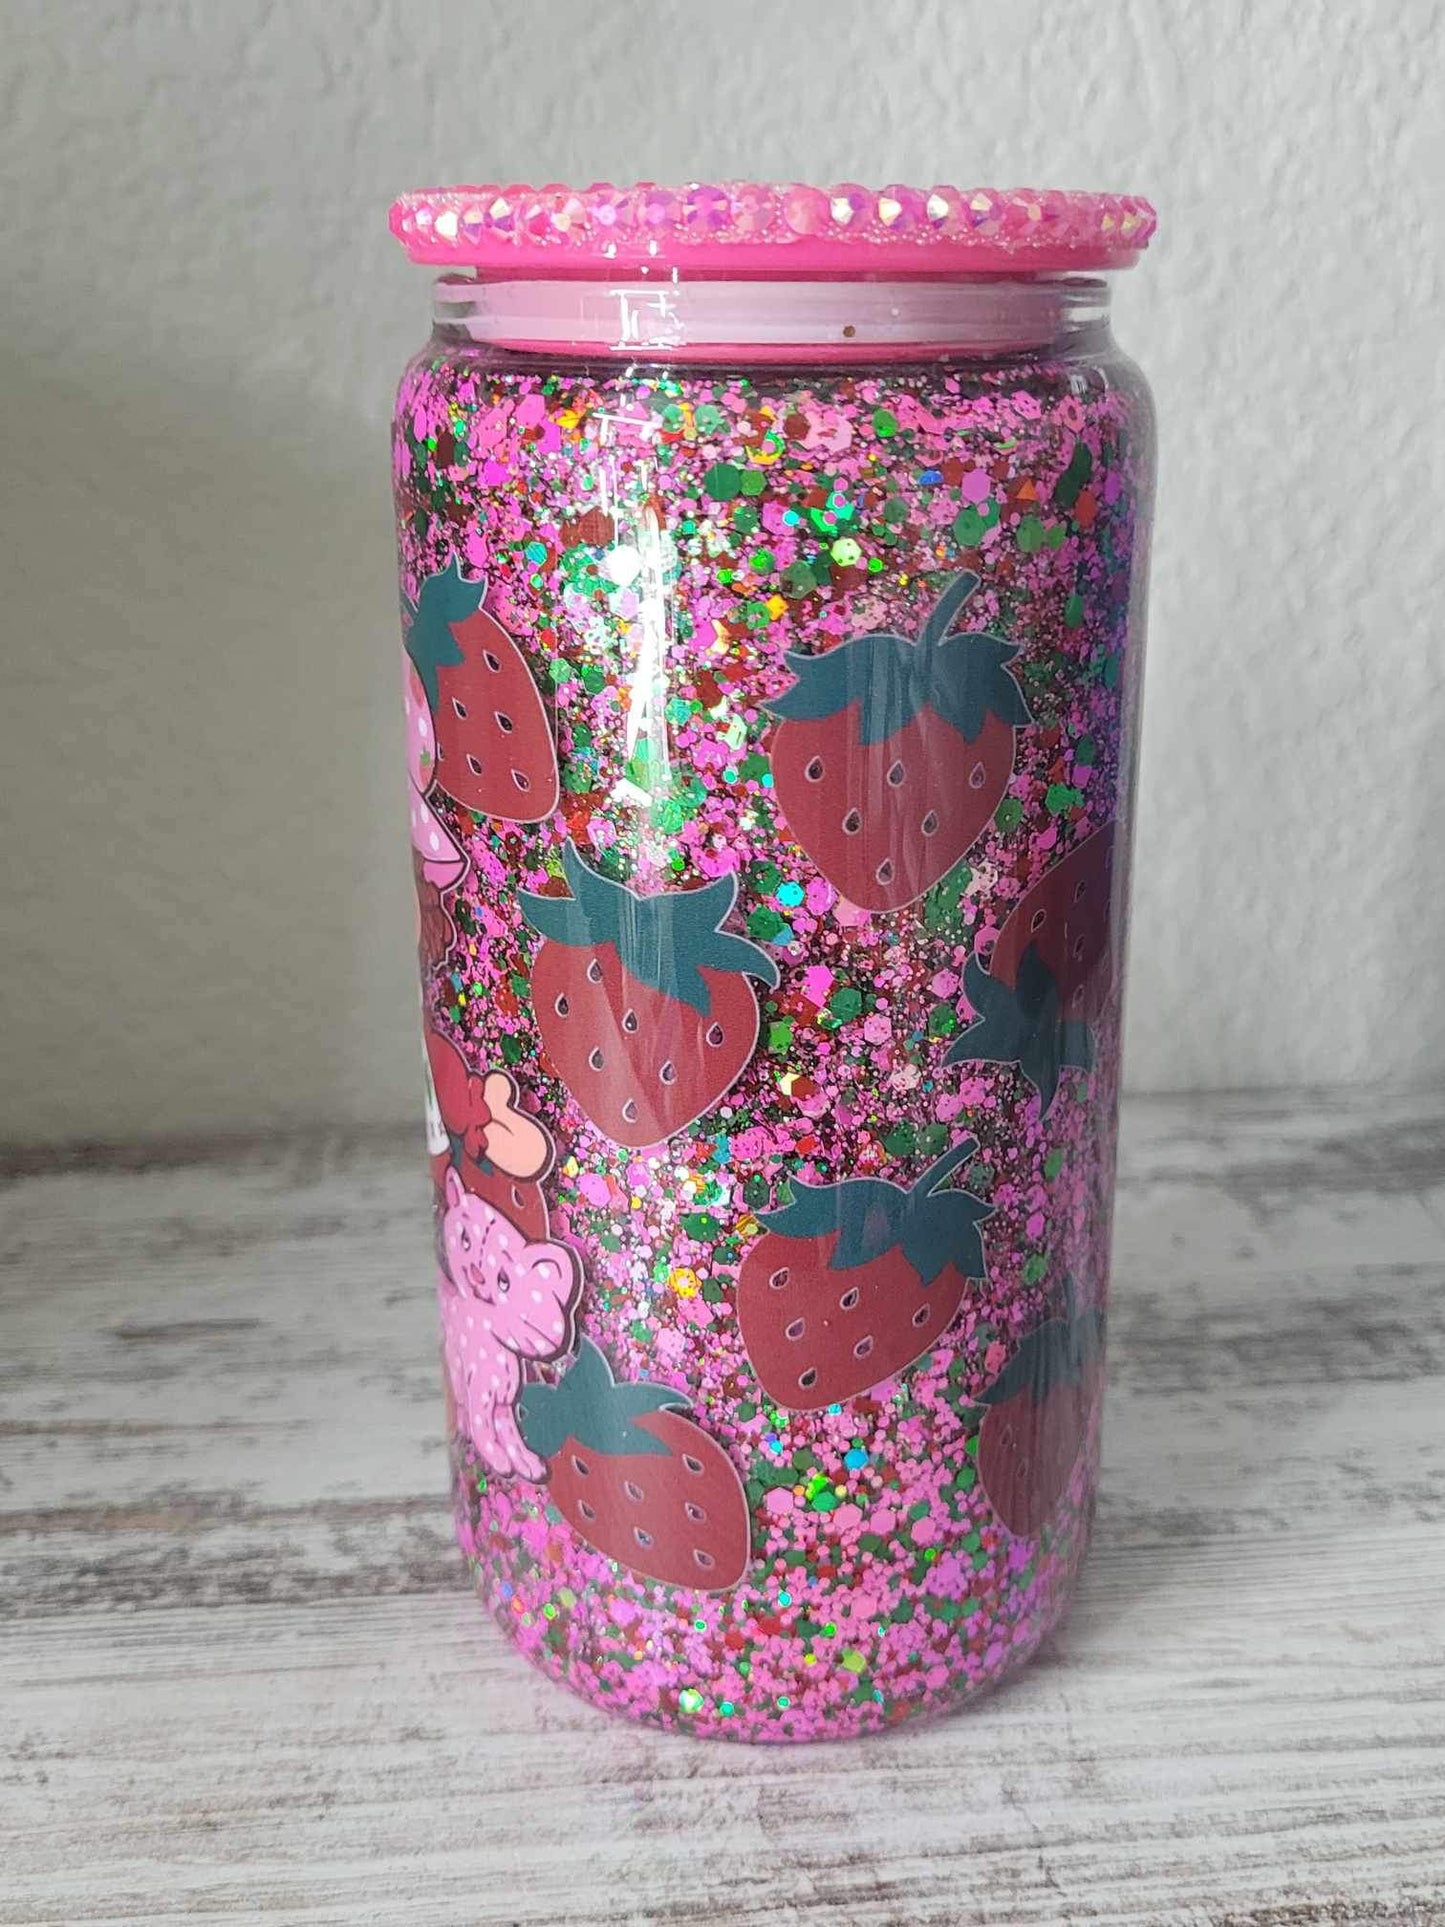 Strawberry Girl 16oz glass rhinestone lid cup. Filled with Green, Pink, and Red Glitter.  Snow Globe cup, Water Globe Cup, suspended glitter